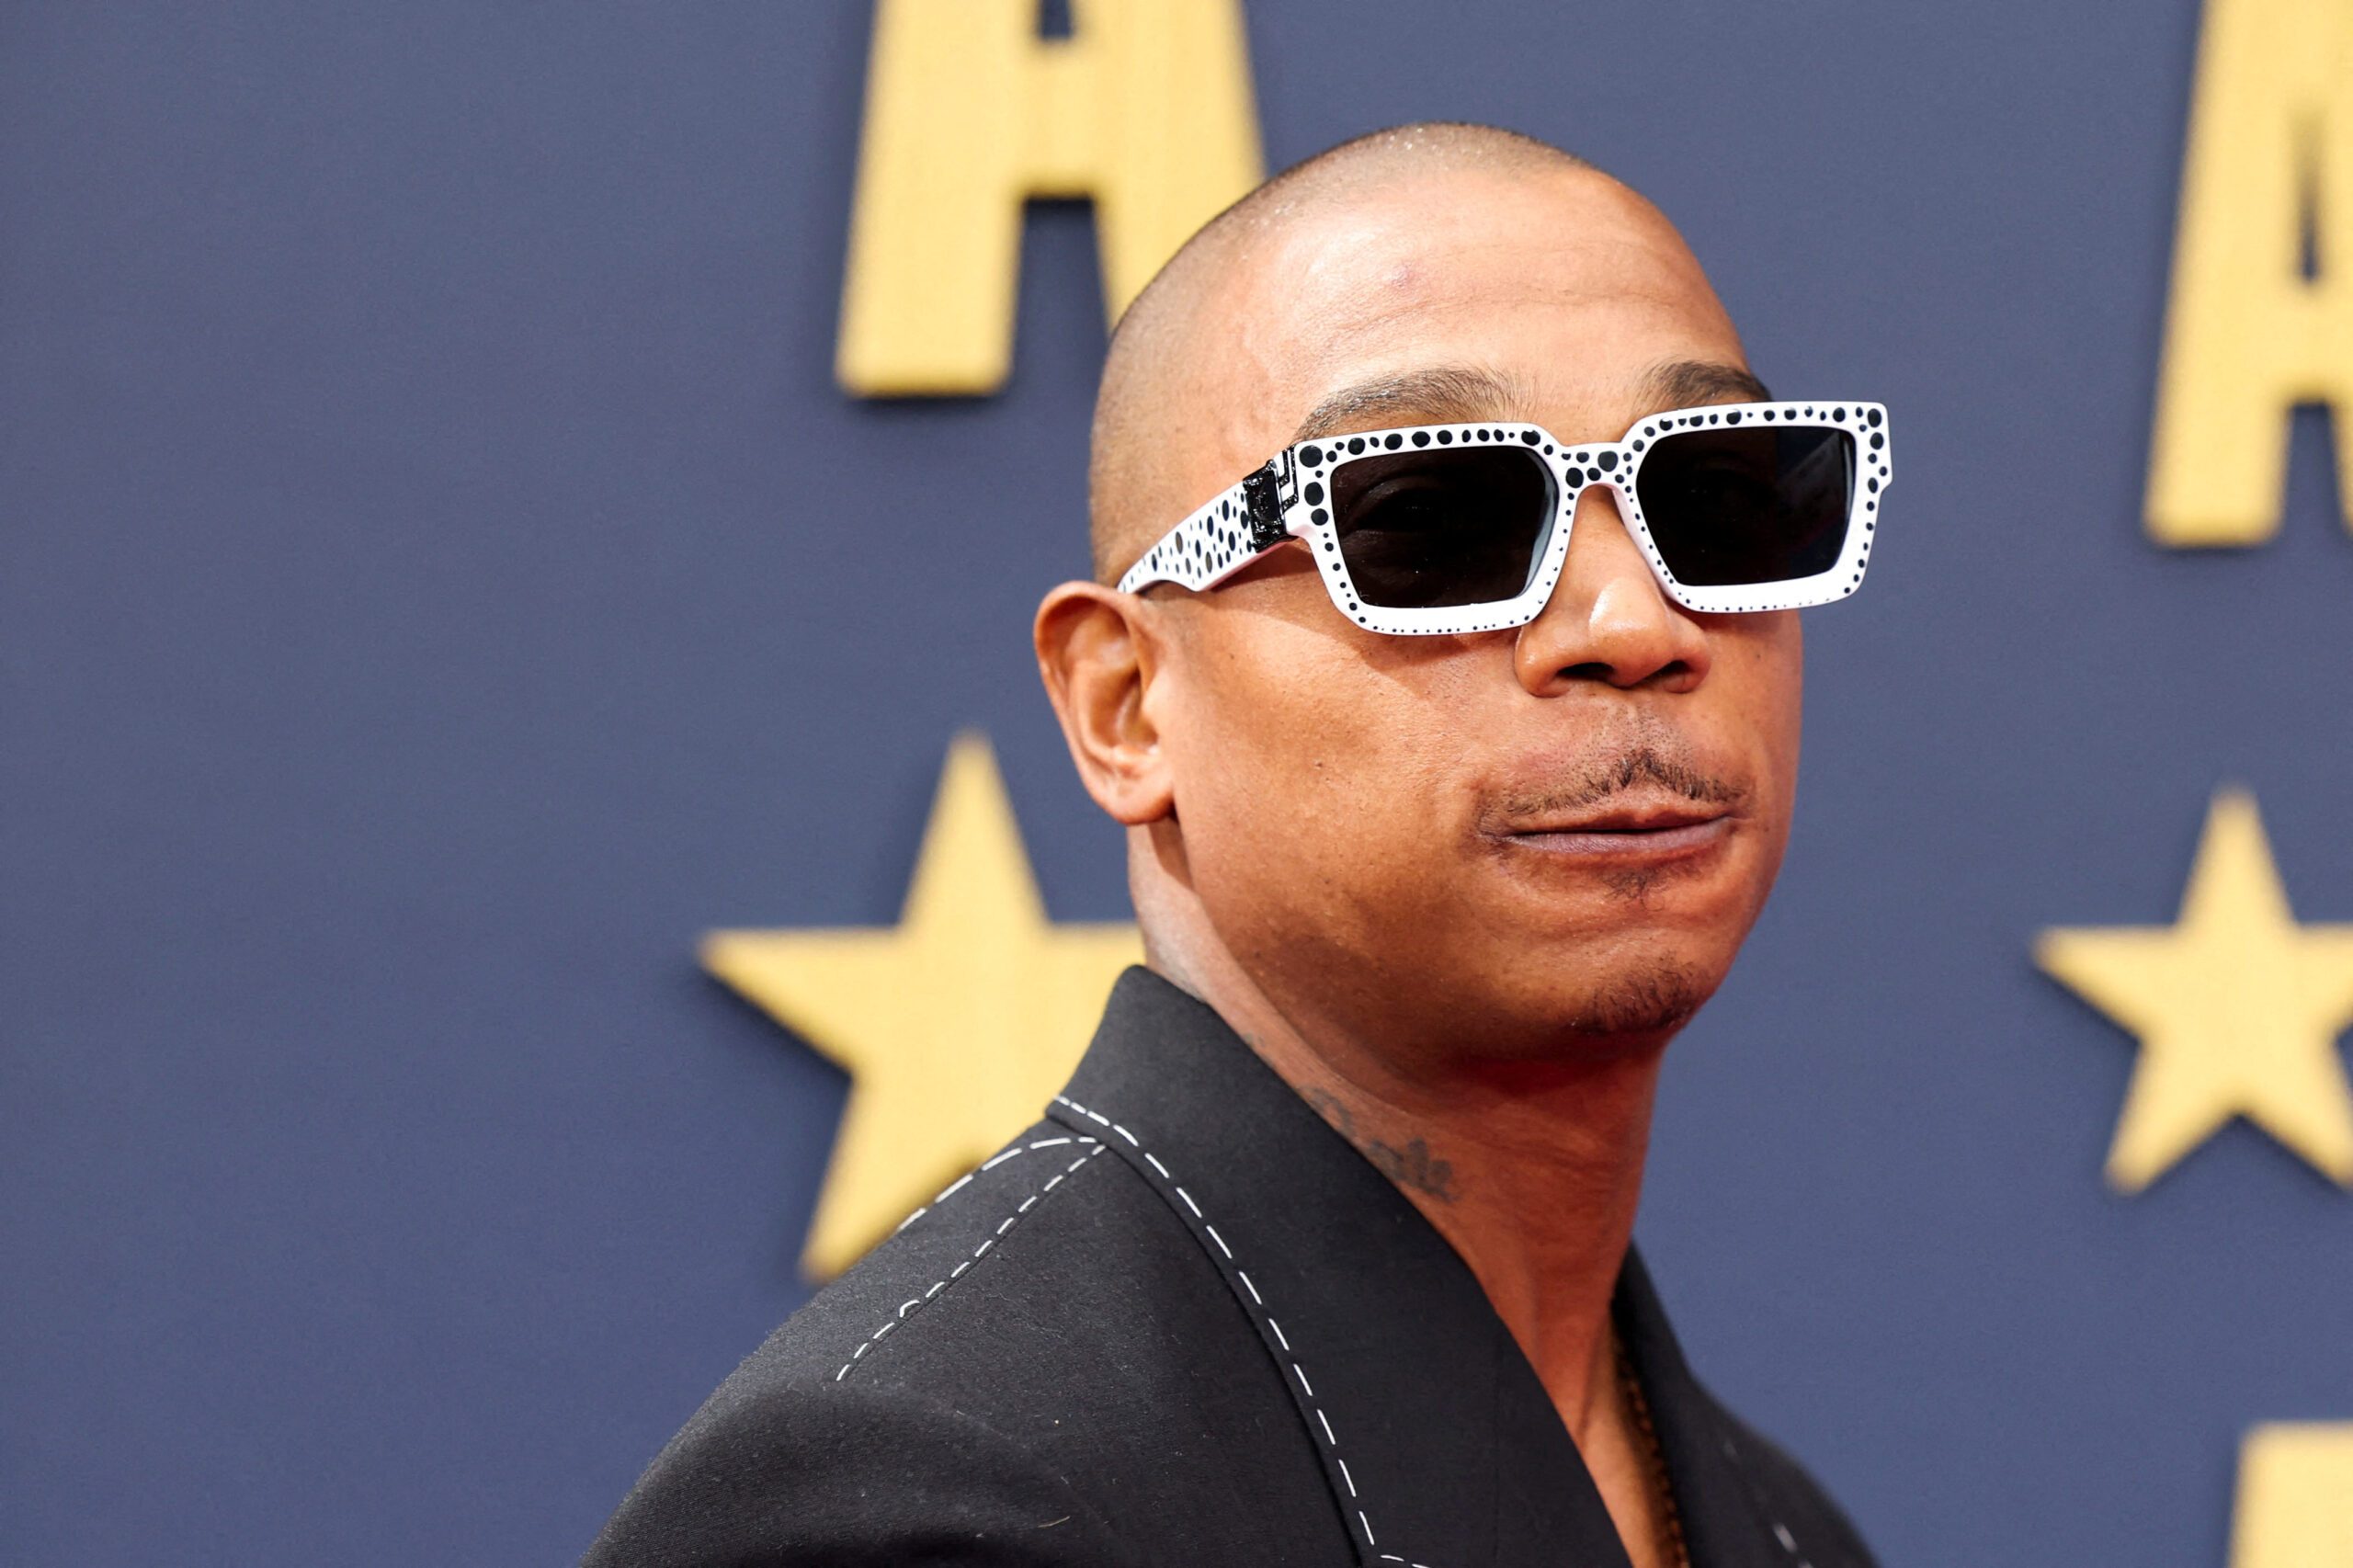 Ja Rule ‘devastated’ at being denied entry to UK for tour